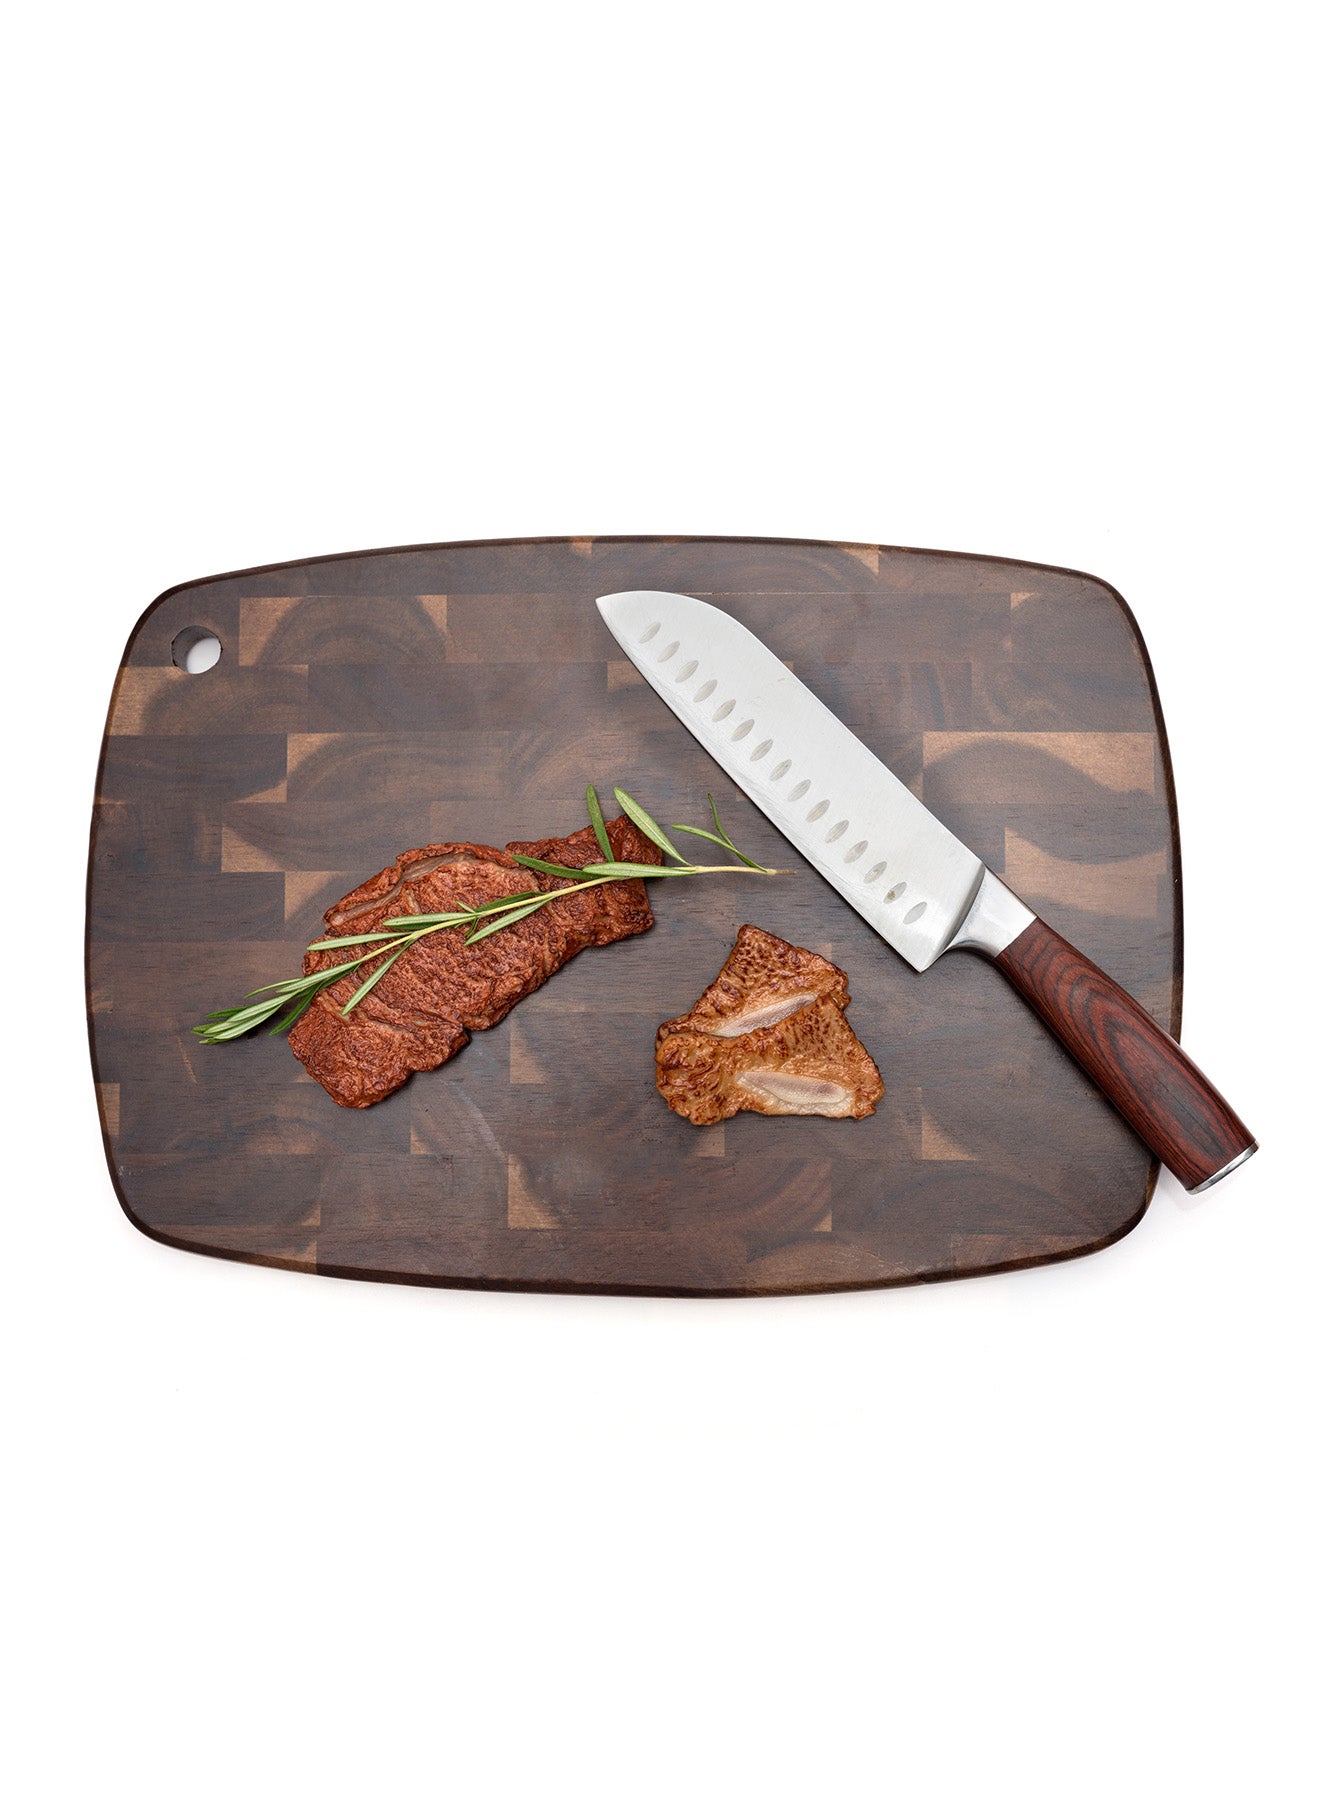 2 Piece Serving Board - Made Of Acacia Wood - Premium Quality - Serving Plate - Serving Dishes - Tray - Wood Platter - By Noon East - Dark Brown M:32x22x1.5 cm L:40x28x2 cm 